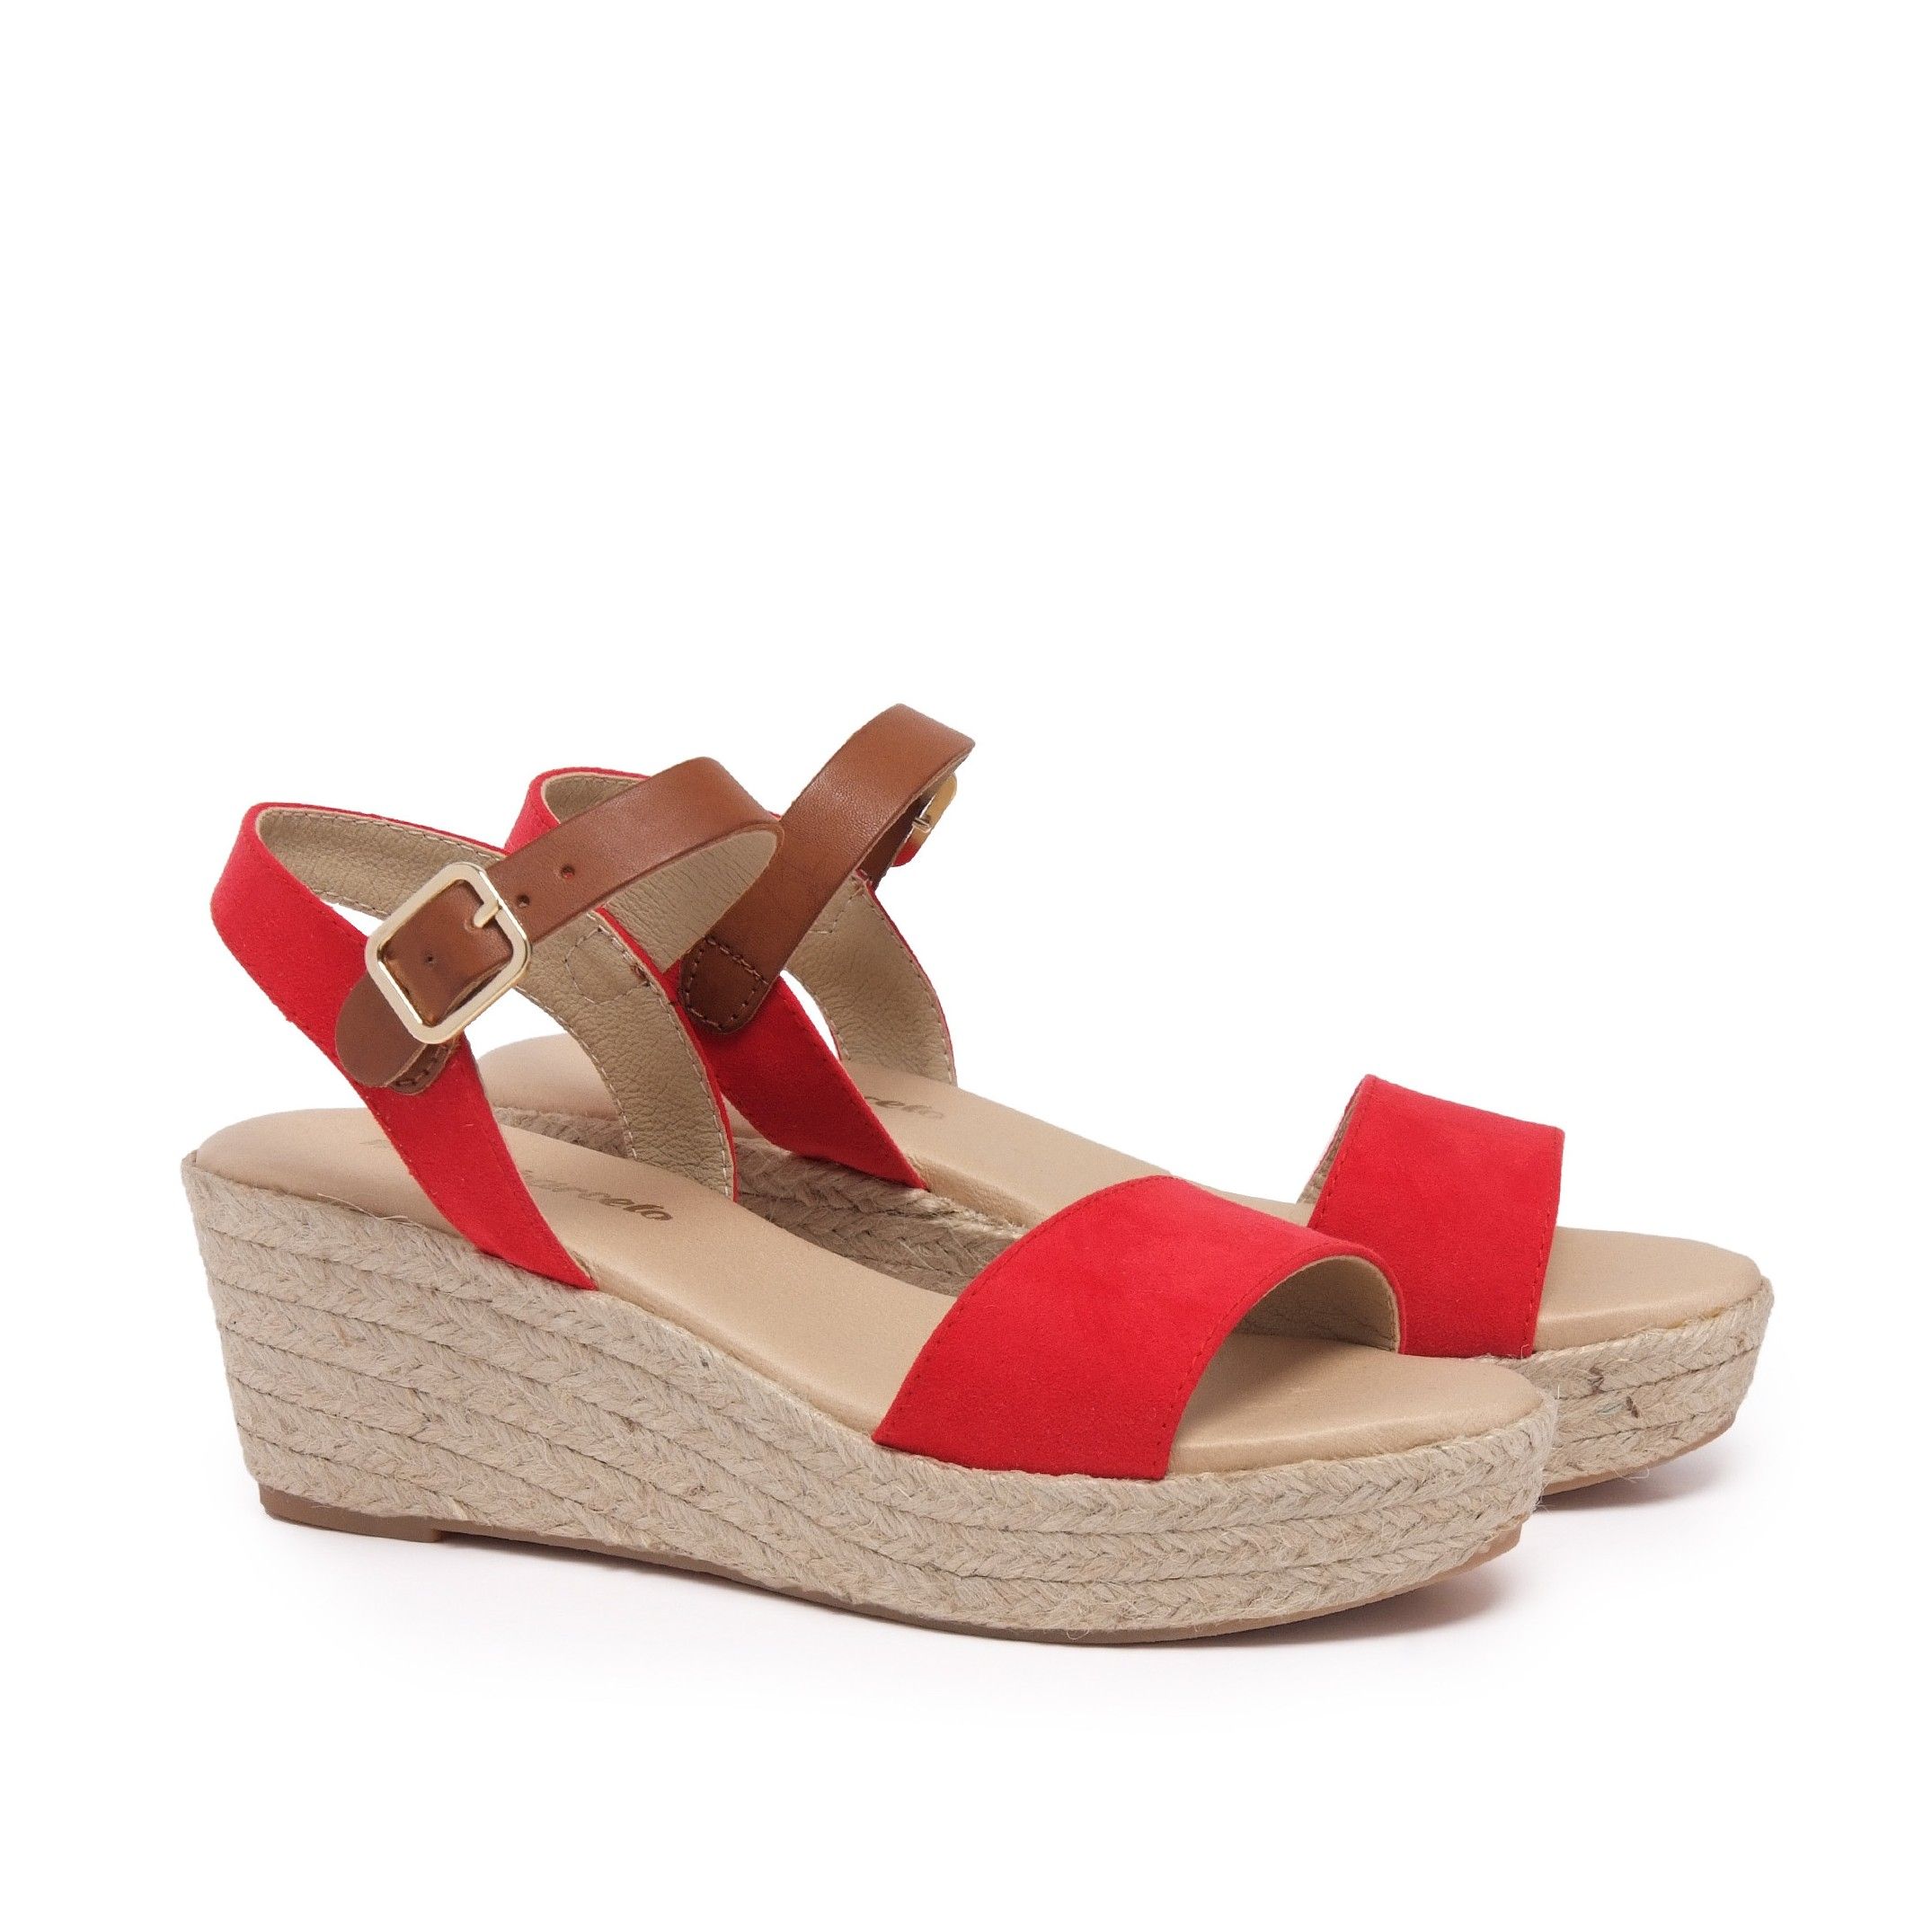 Jute and leather wedge sandal. Closure: metallic buckle at ankle height. Upper: leather and tissue. Insole: gel lined in leather. Wedge: 6 cm of jute. Platform: 2,5 cm. Sole:Non-skid rubber. MADE IN SPAIN.